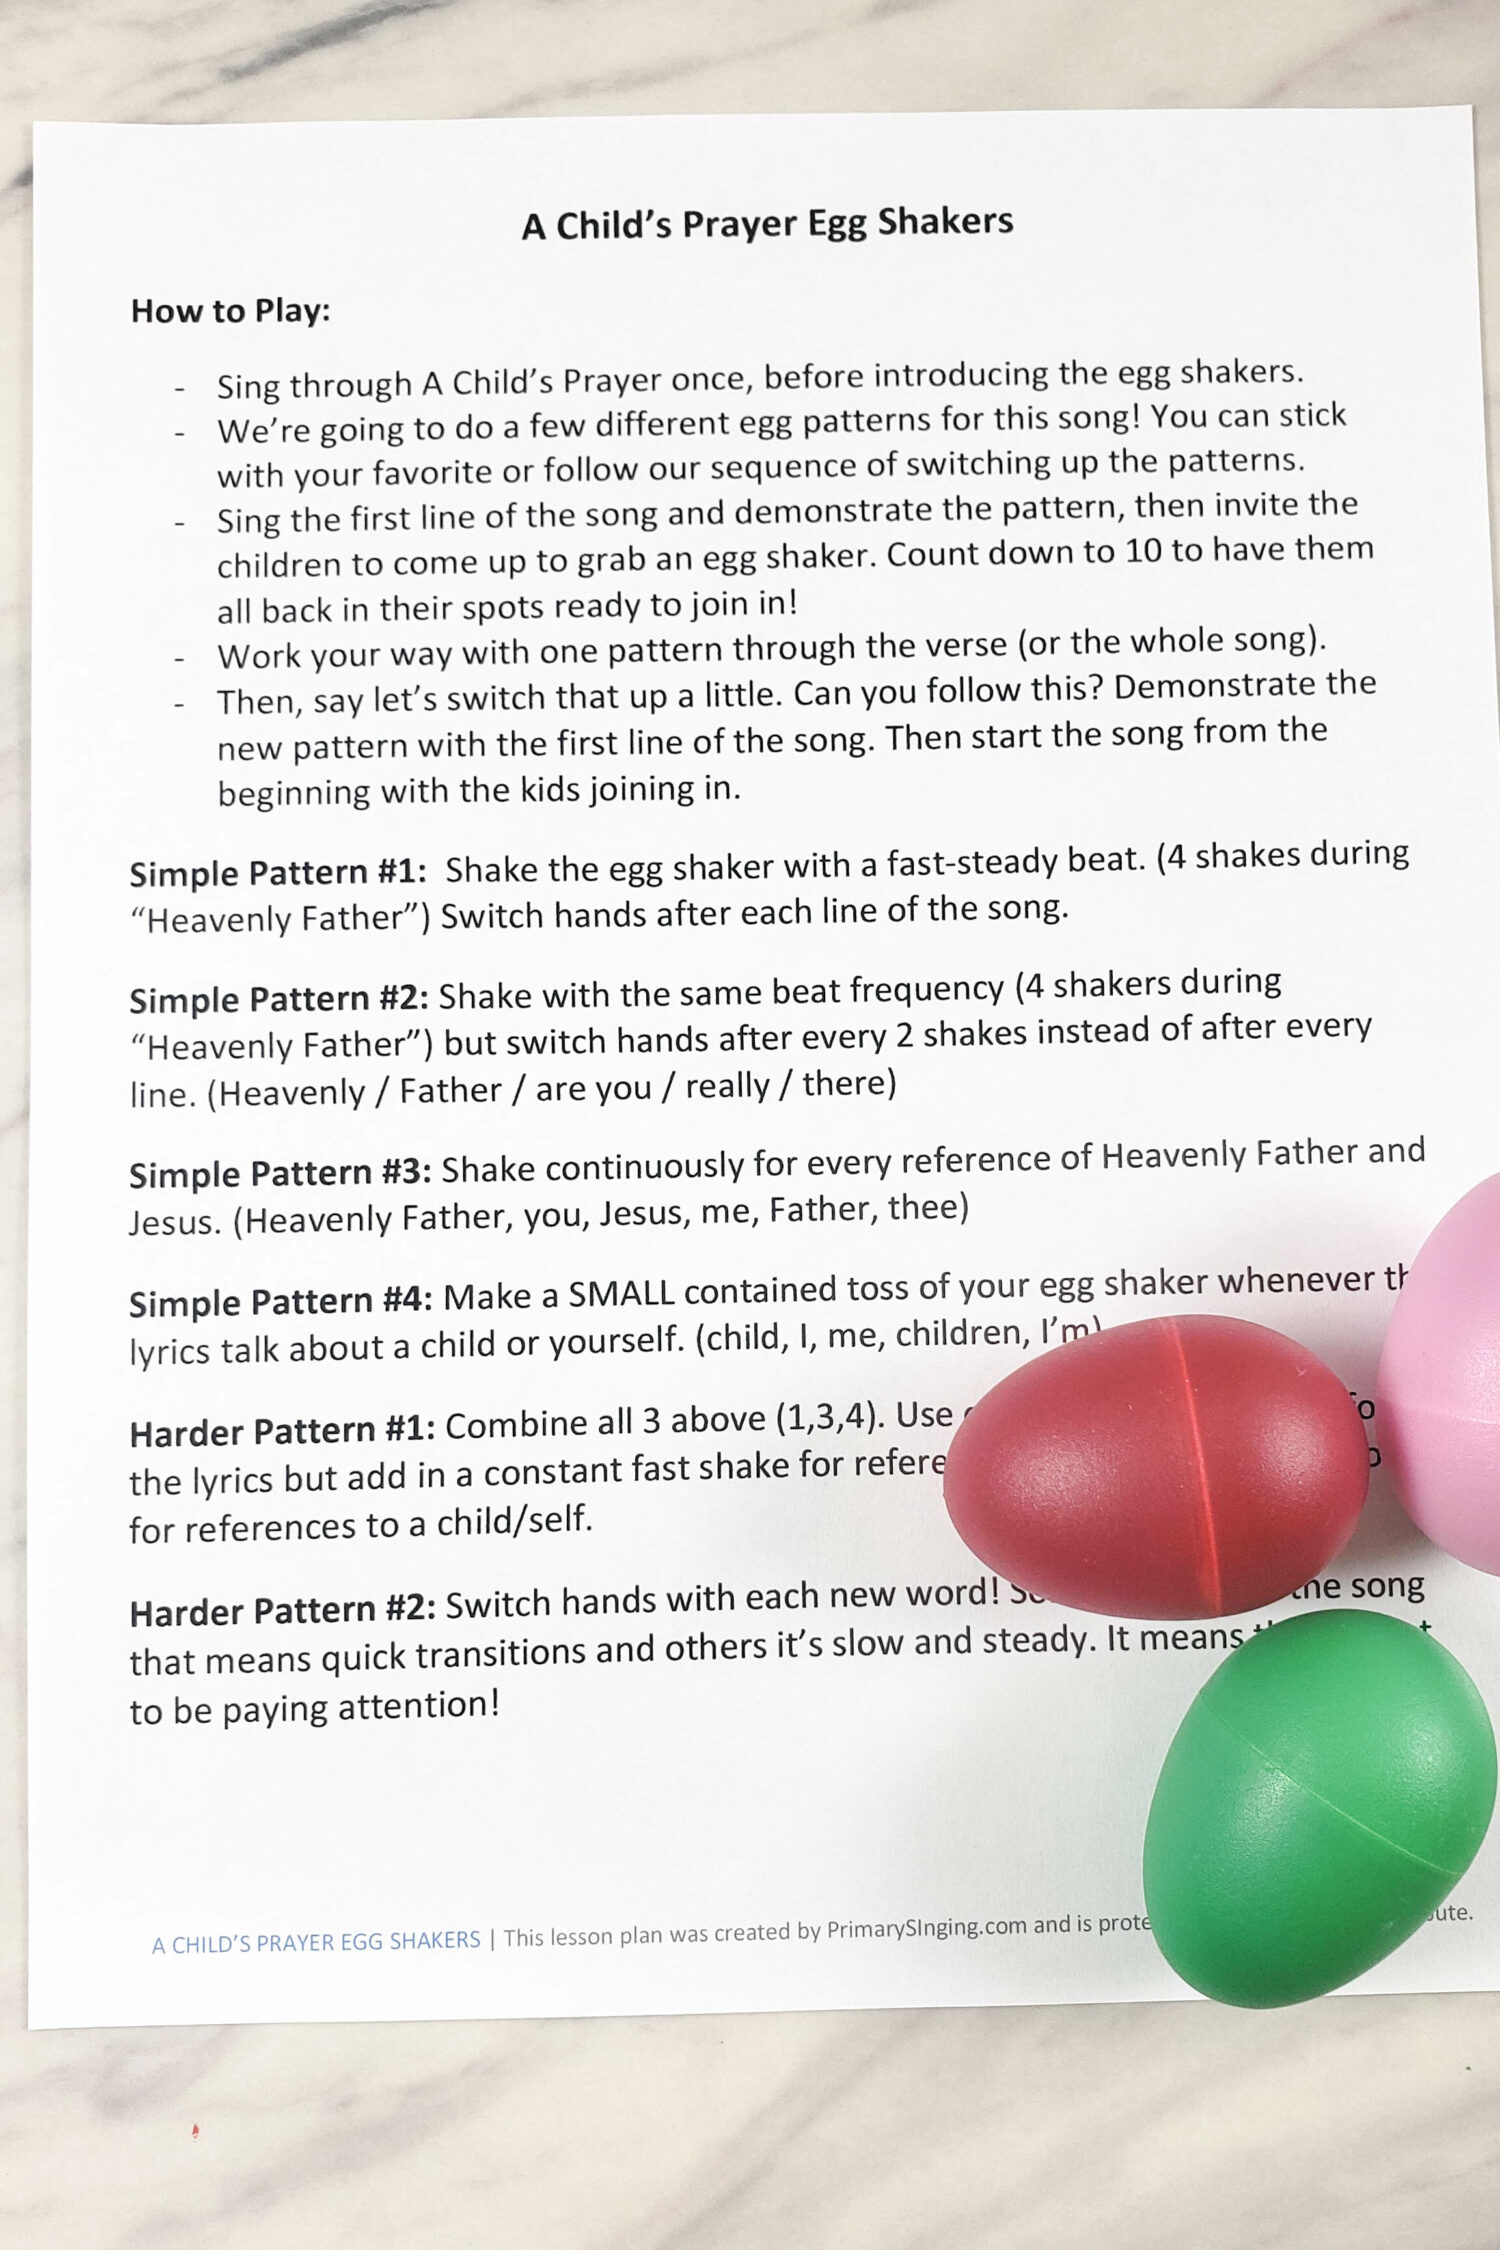 A Child's Prayer egg shakers fun singing time ideas with 4 simple patterns and 2 more challenging egg shaker patterns to have fun teaching this song for LDS Primary music leaders.